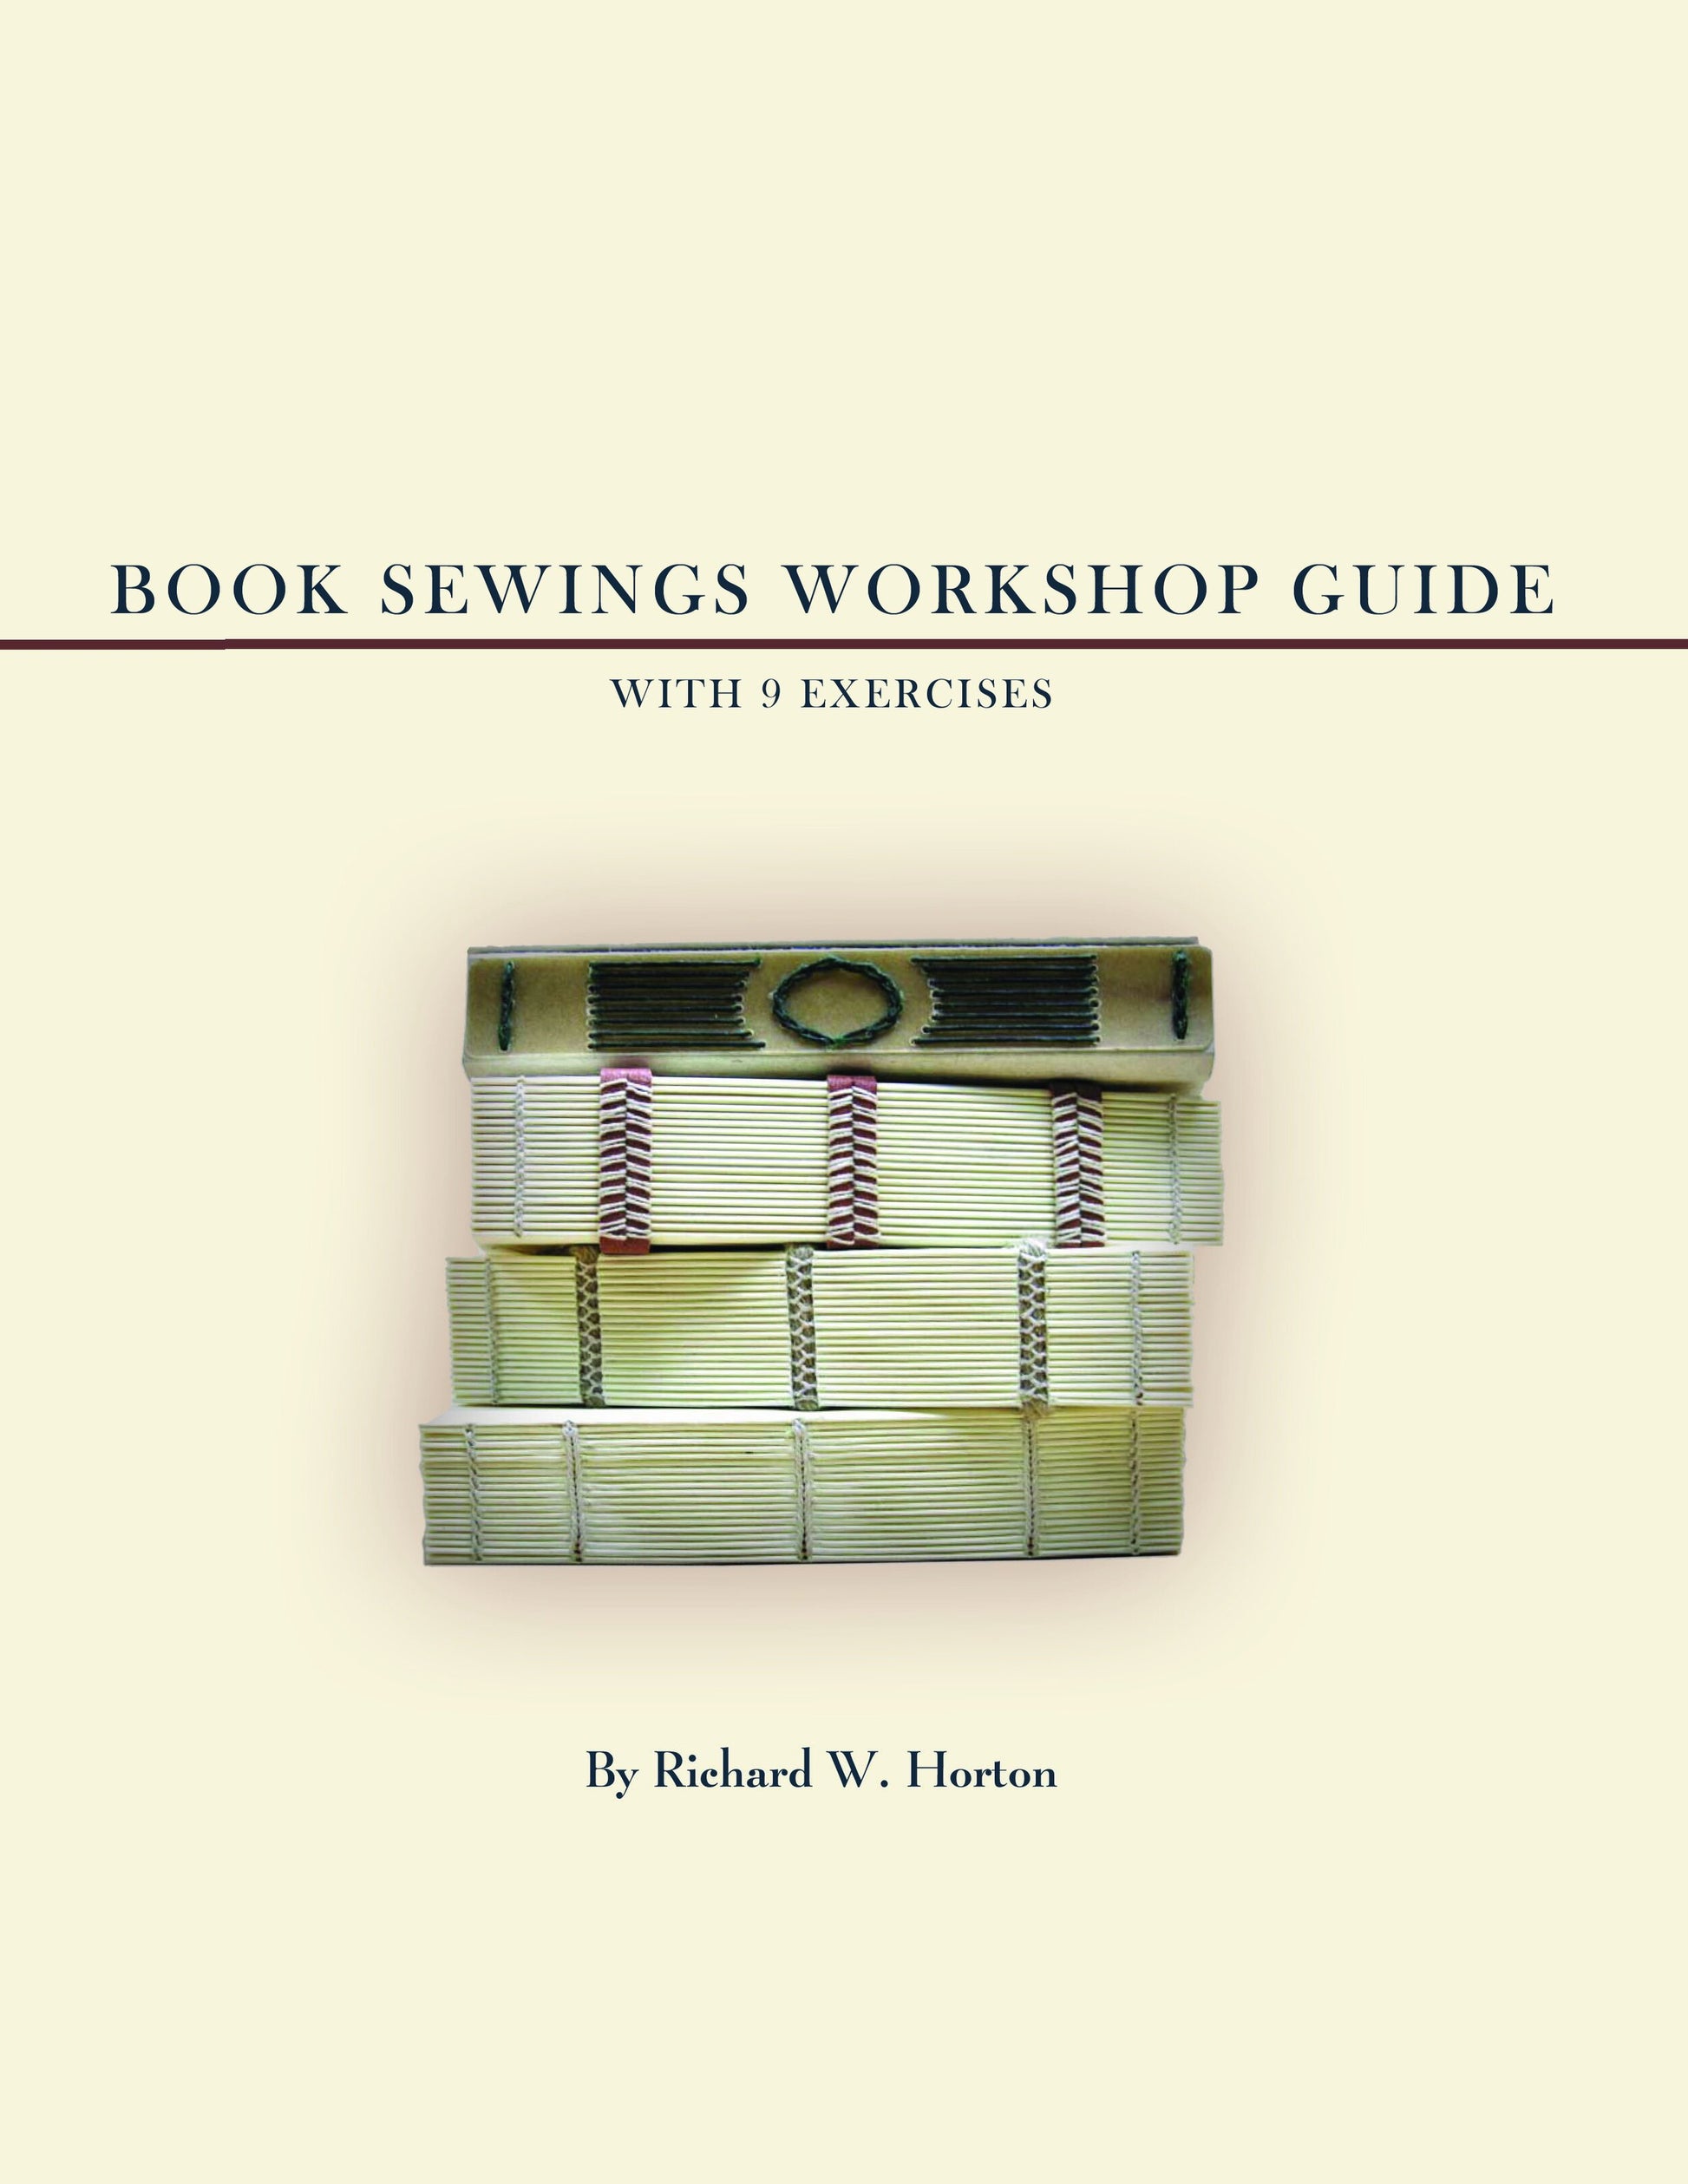 Book Sewings Workshop Guide, With 9 Exercises 